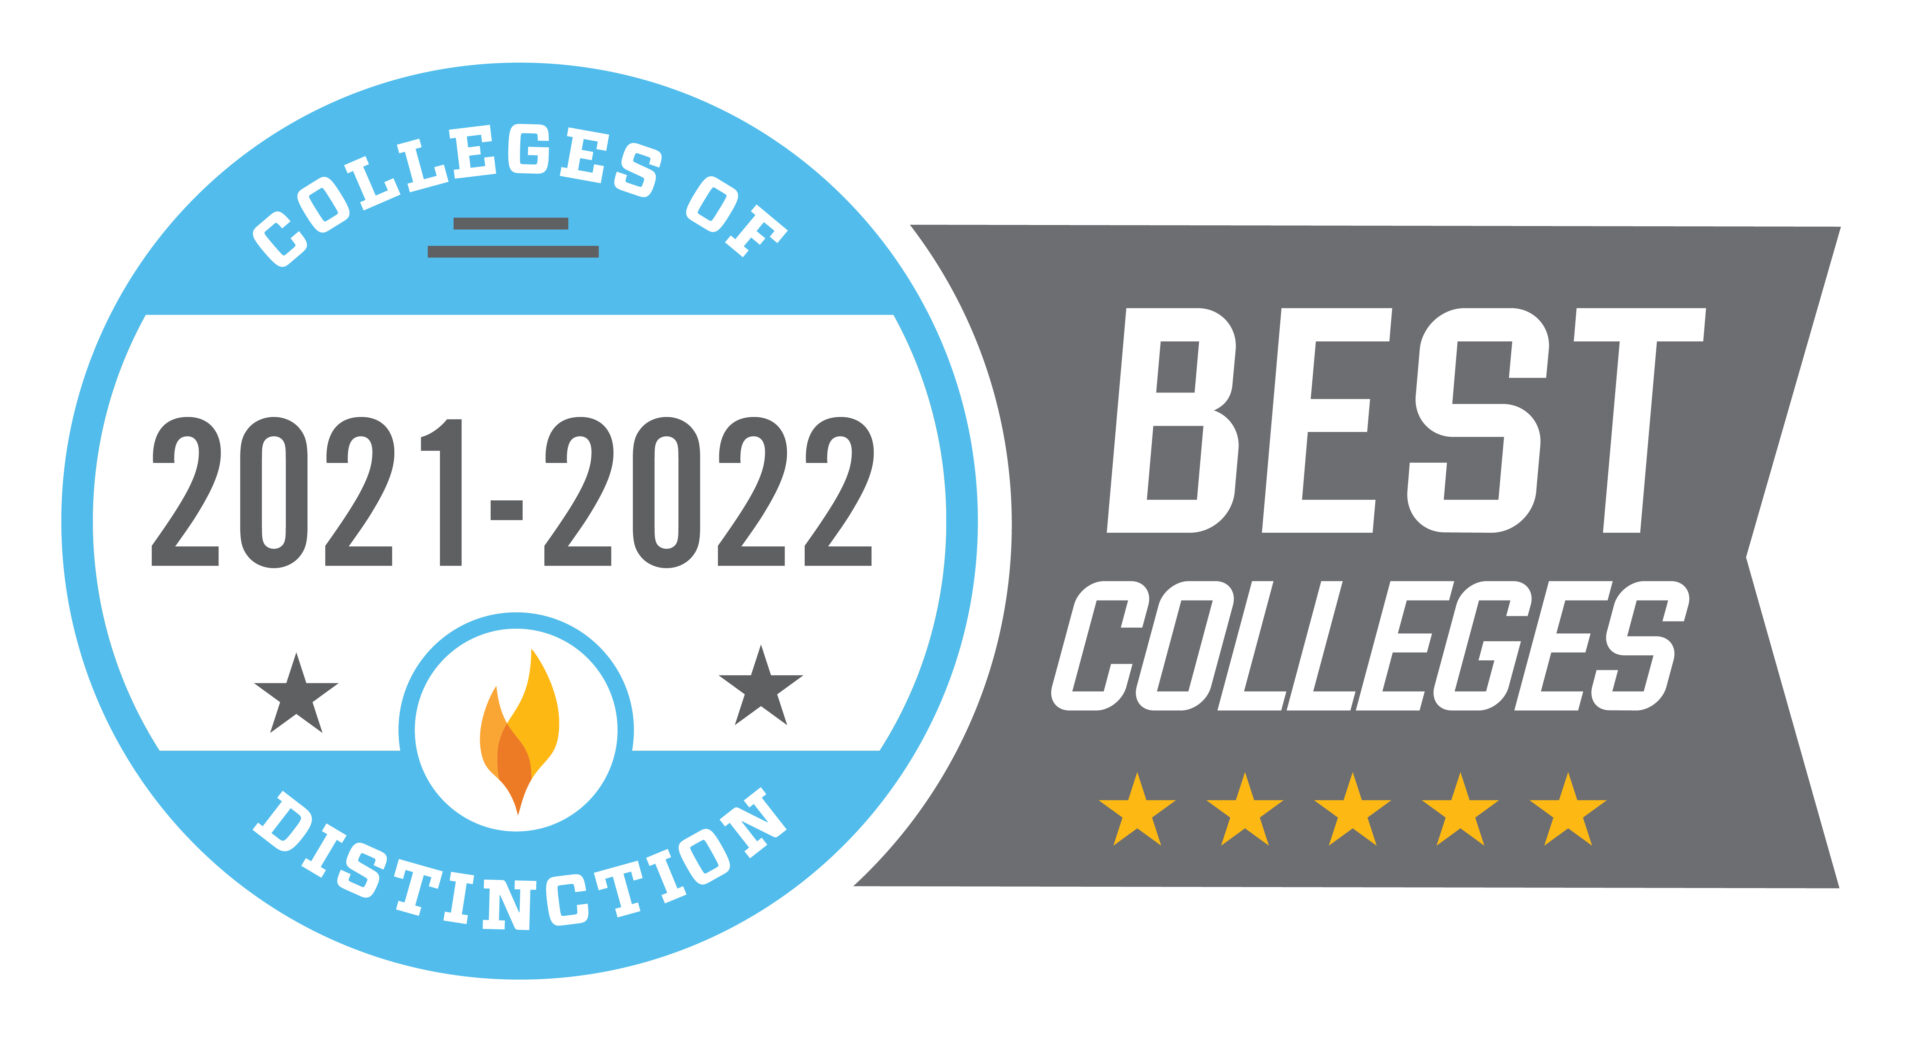 "2021-2022 Colleges of Distinction Best Colleges"